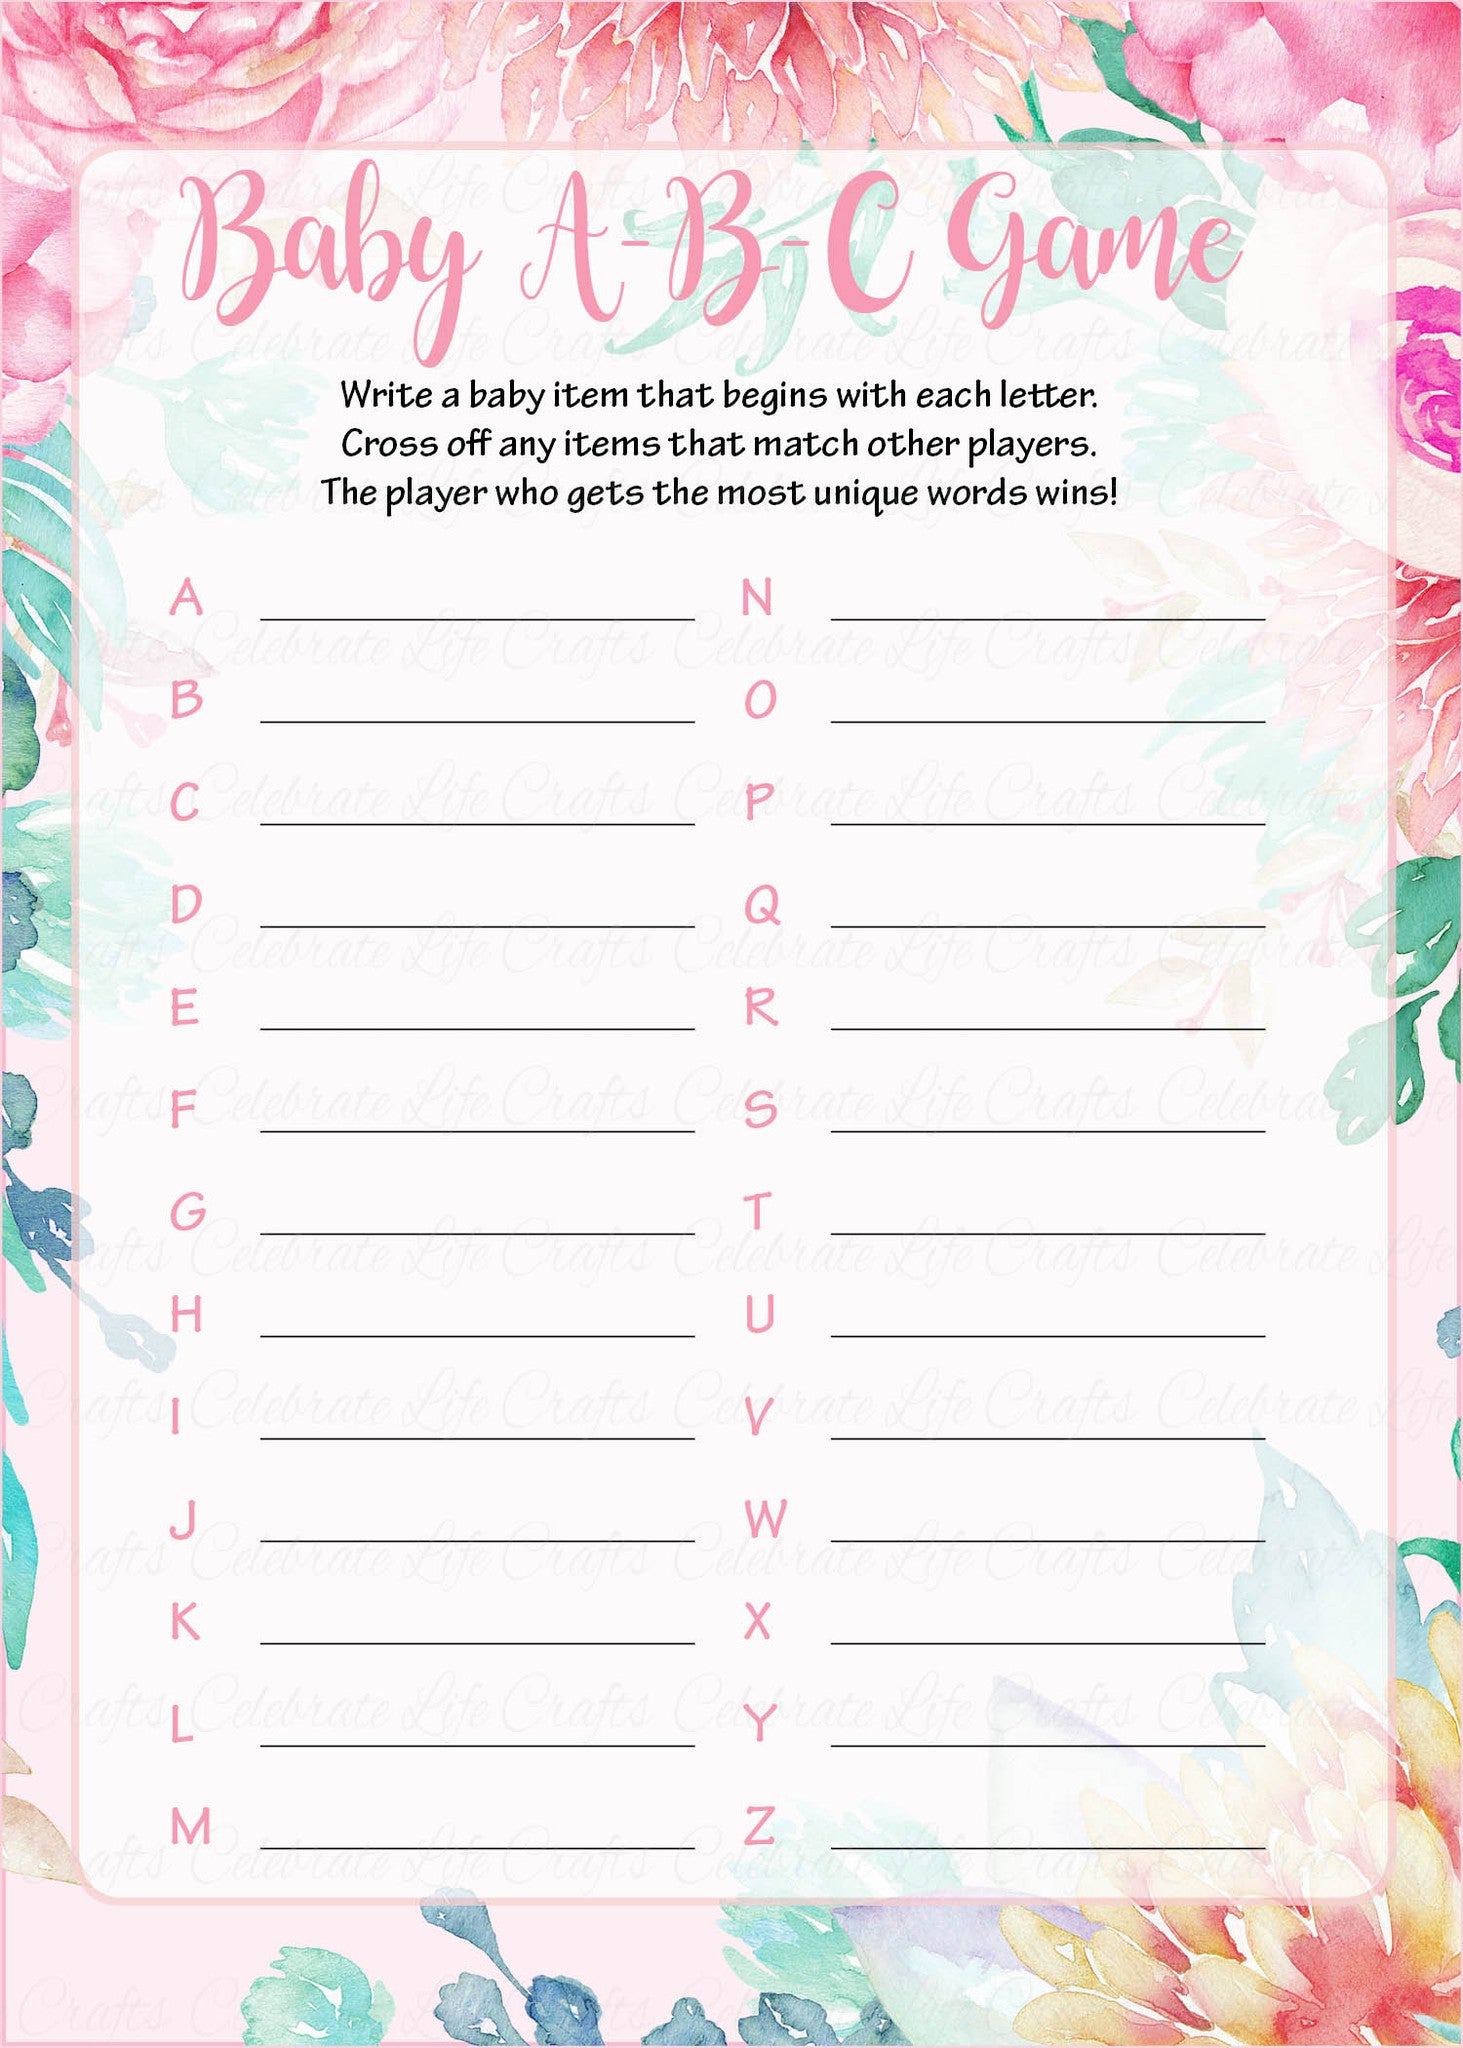 baby-abc-s-baby-shower-game-spring-baby-shower-theme-for-baby-girl